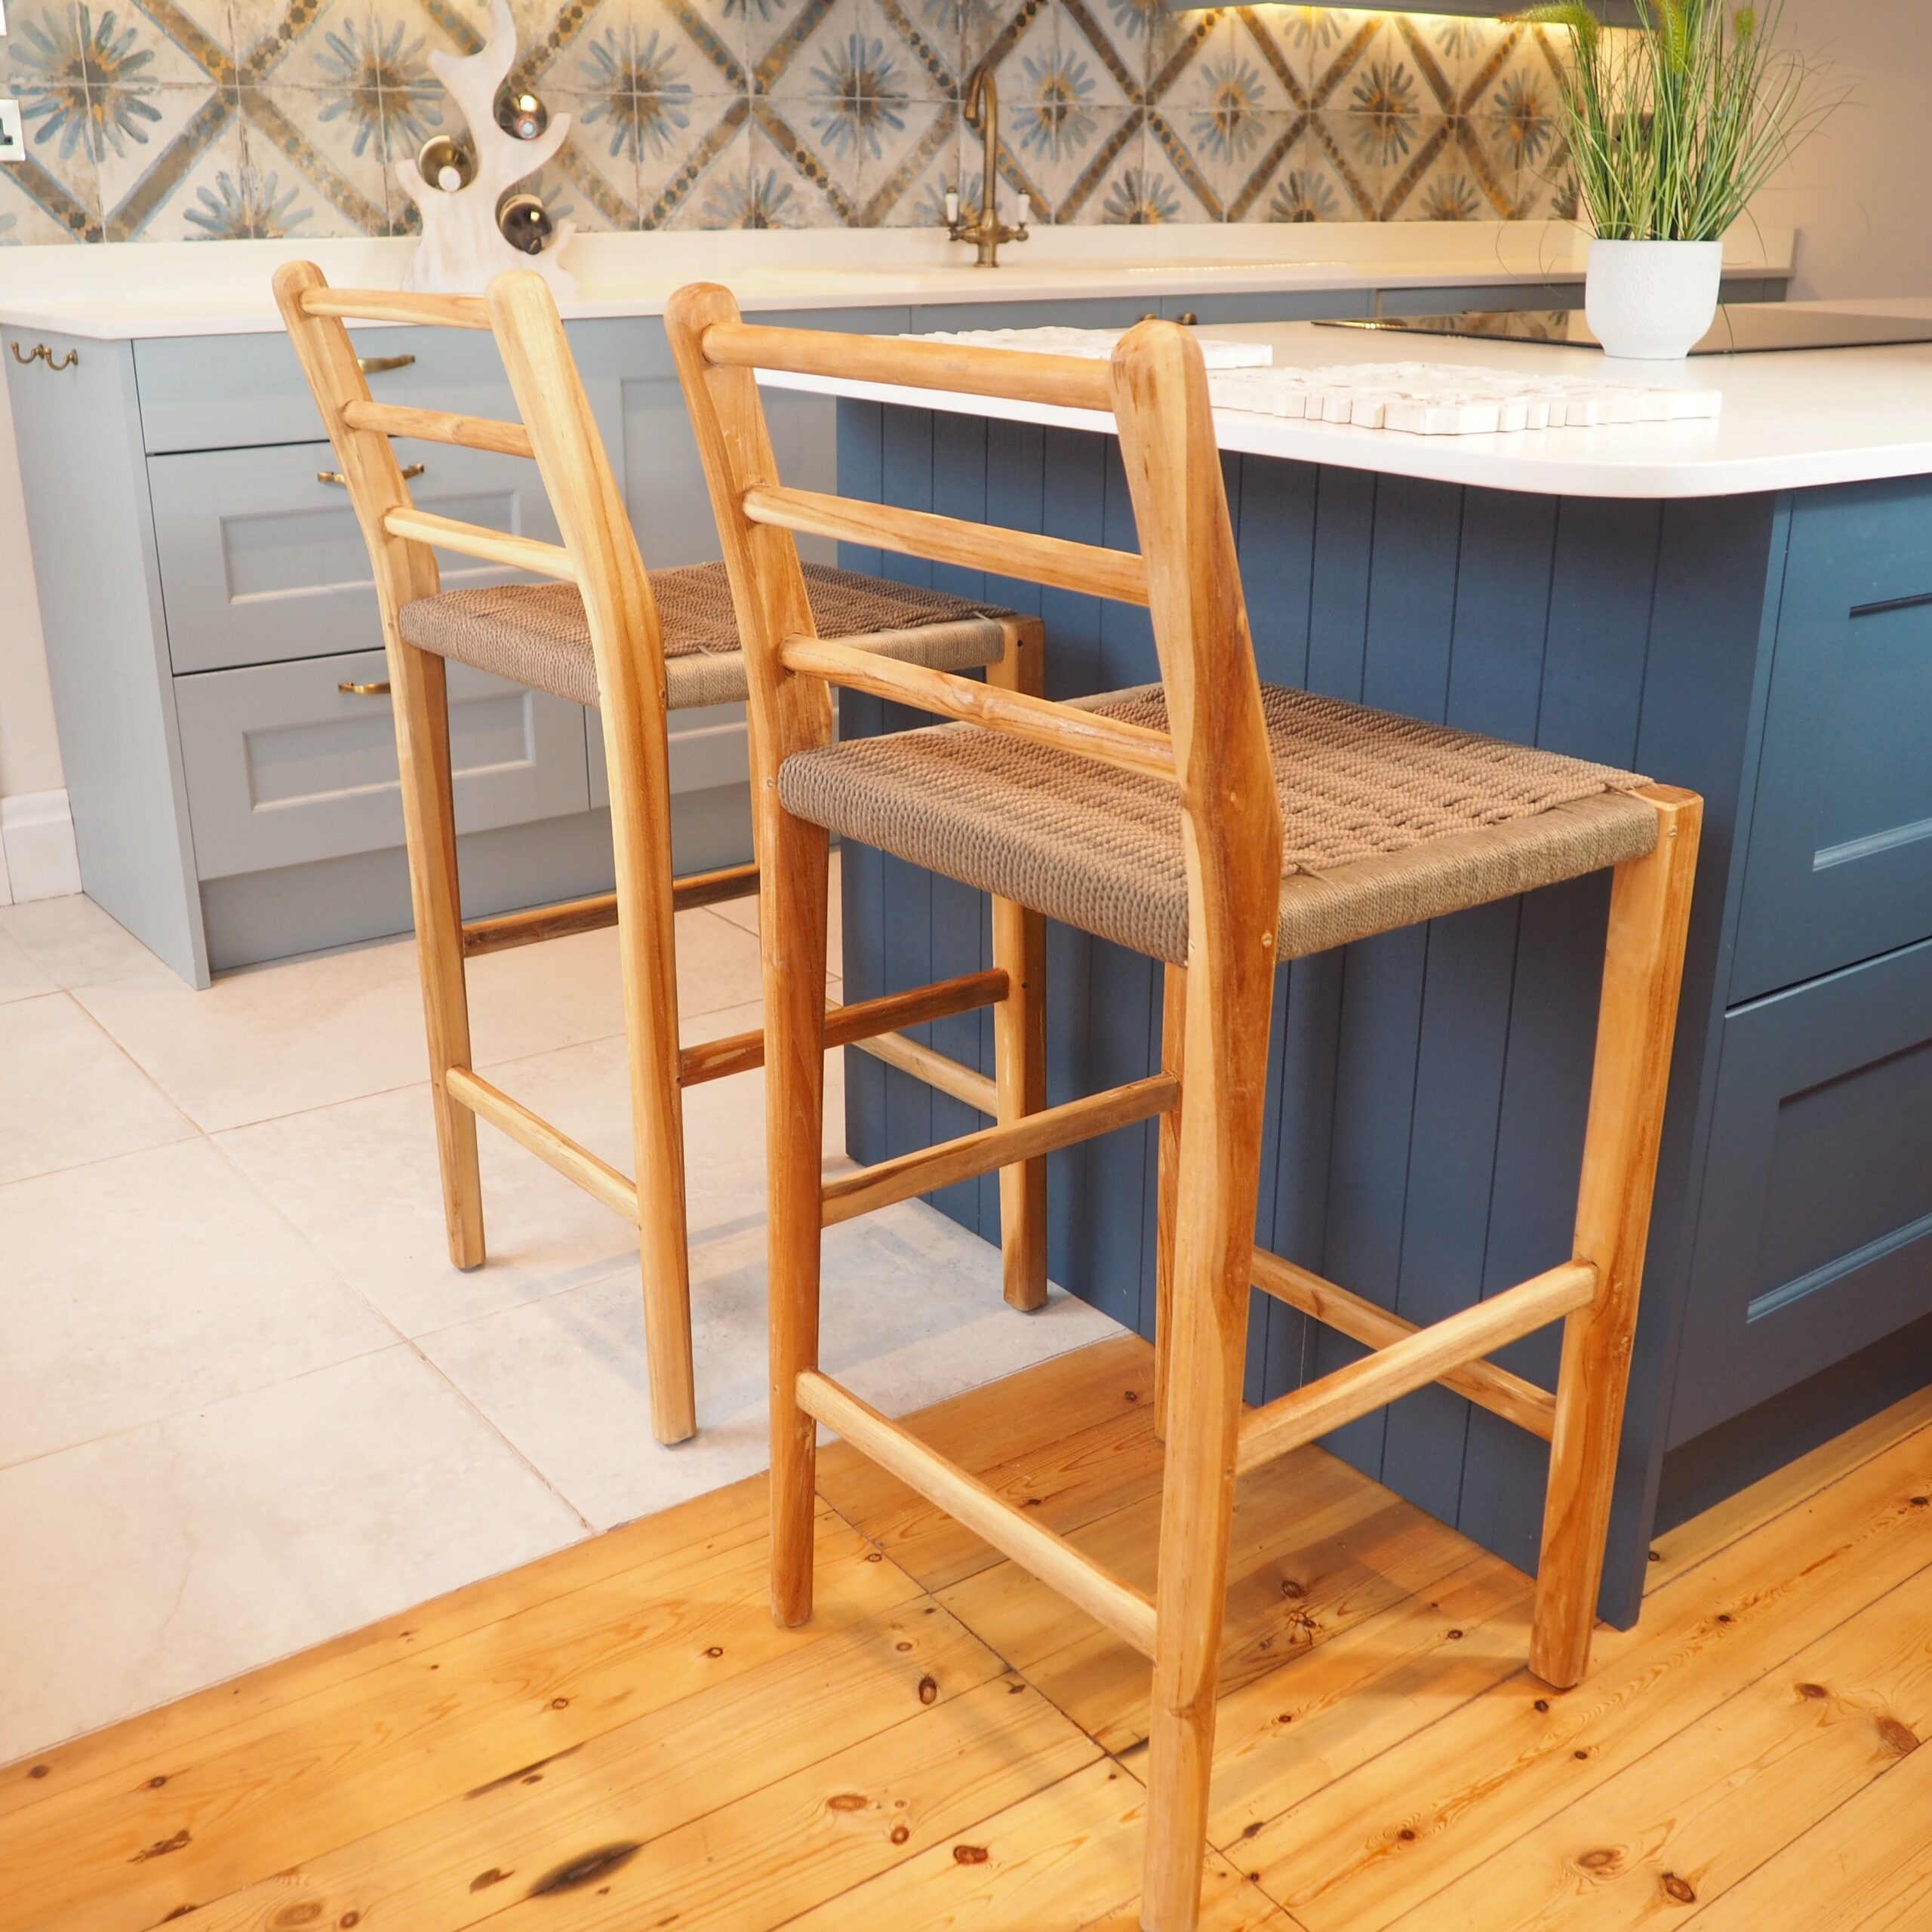 Natural wicker kitchen stools in kitchen setting in front of blue island